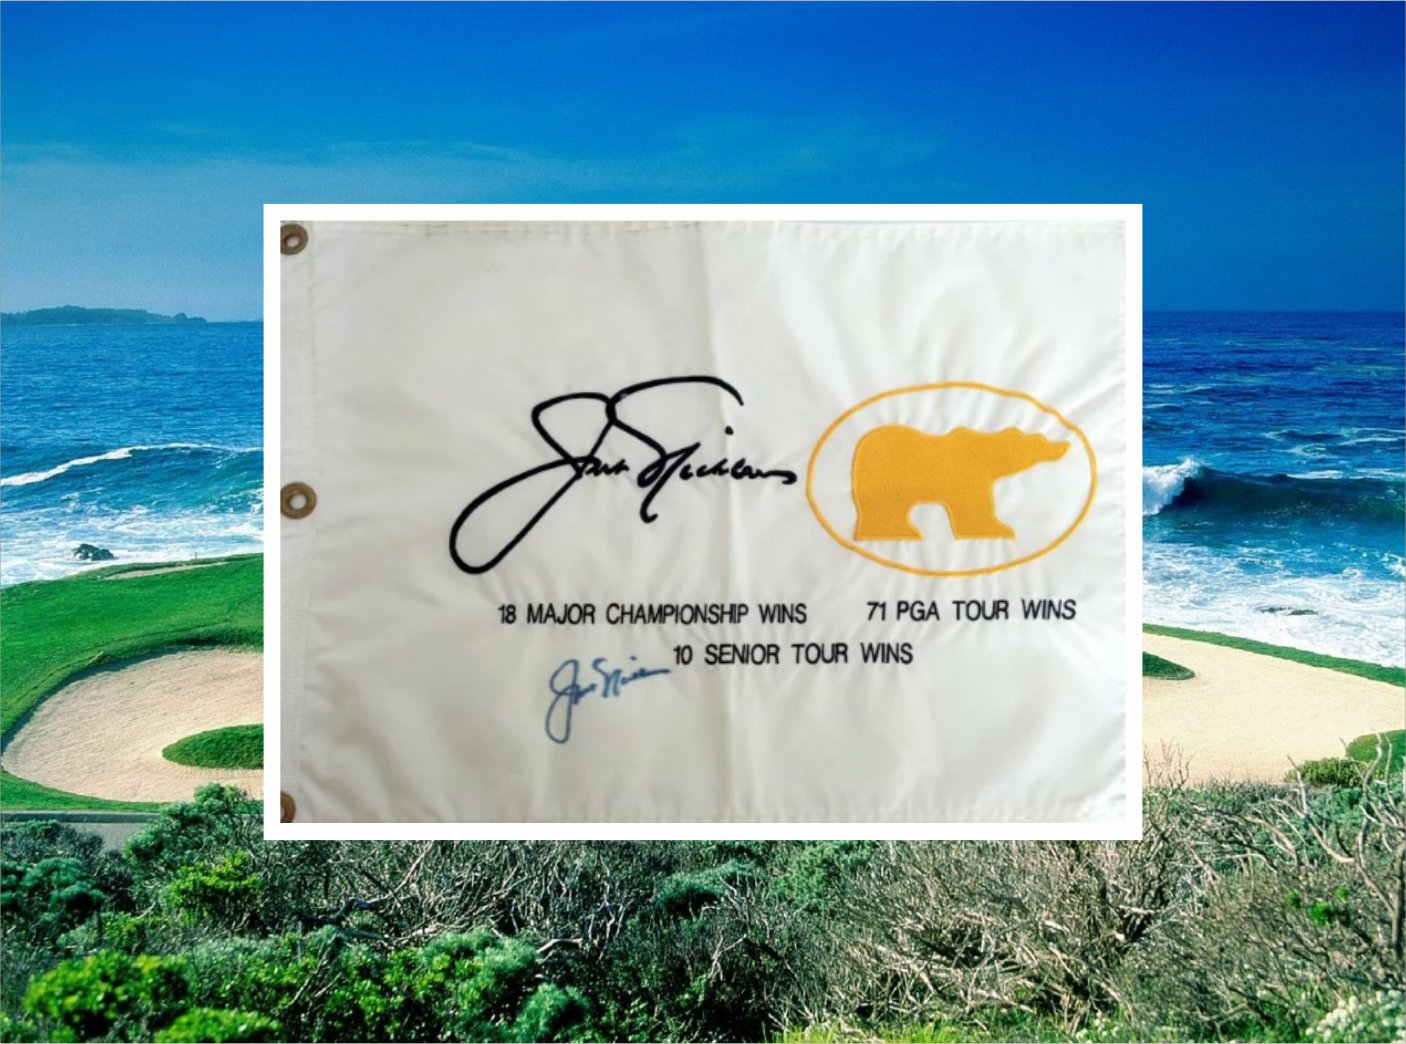 Jack Nicklaus with the embroidered golf flag sign with proof